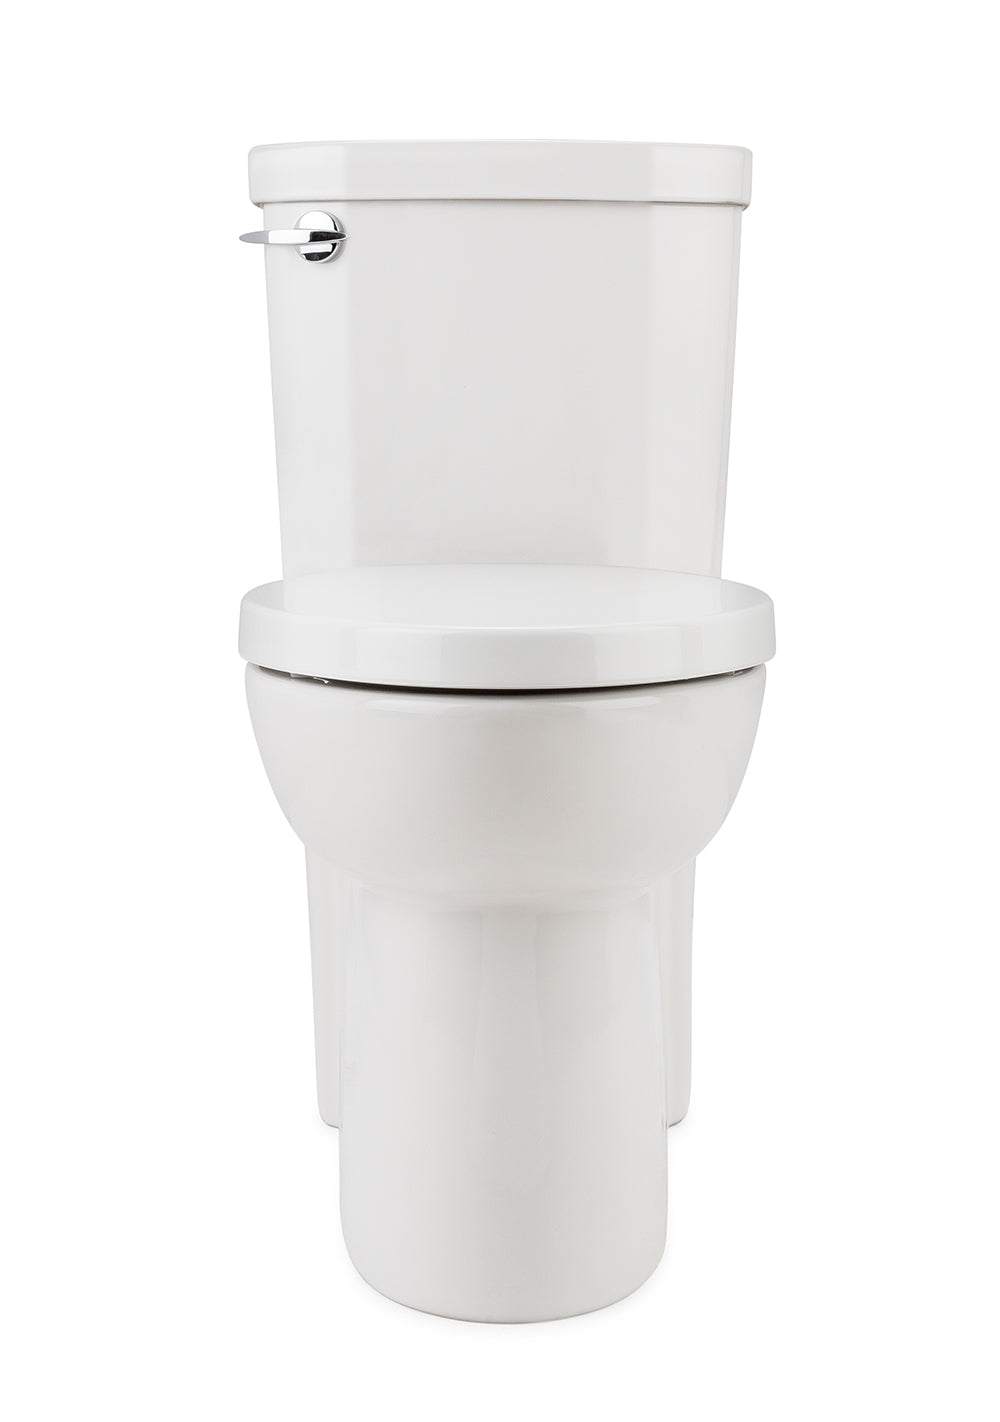 Bath Royale Family Toilet Seat Mounted Front